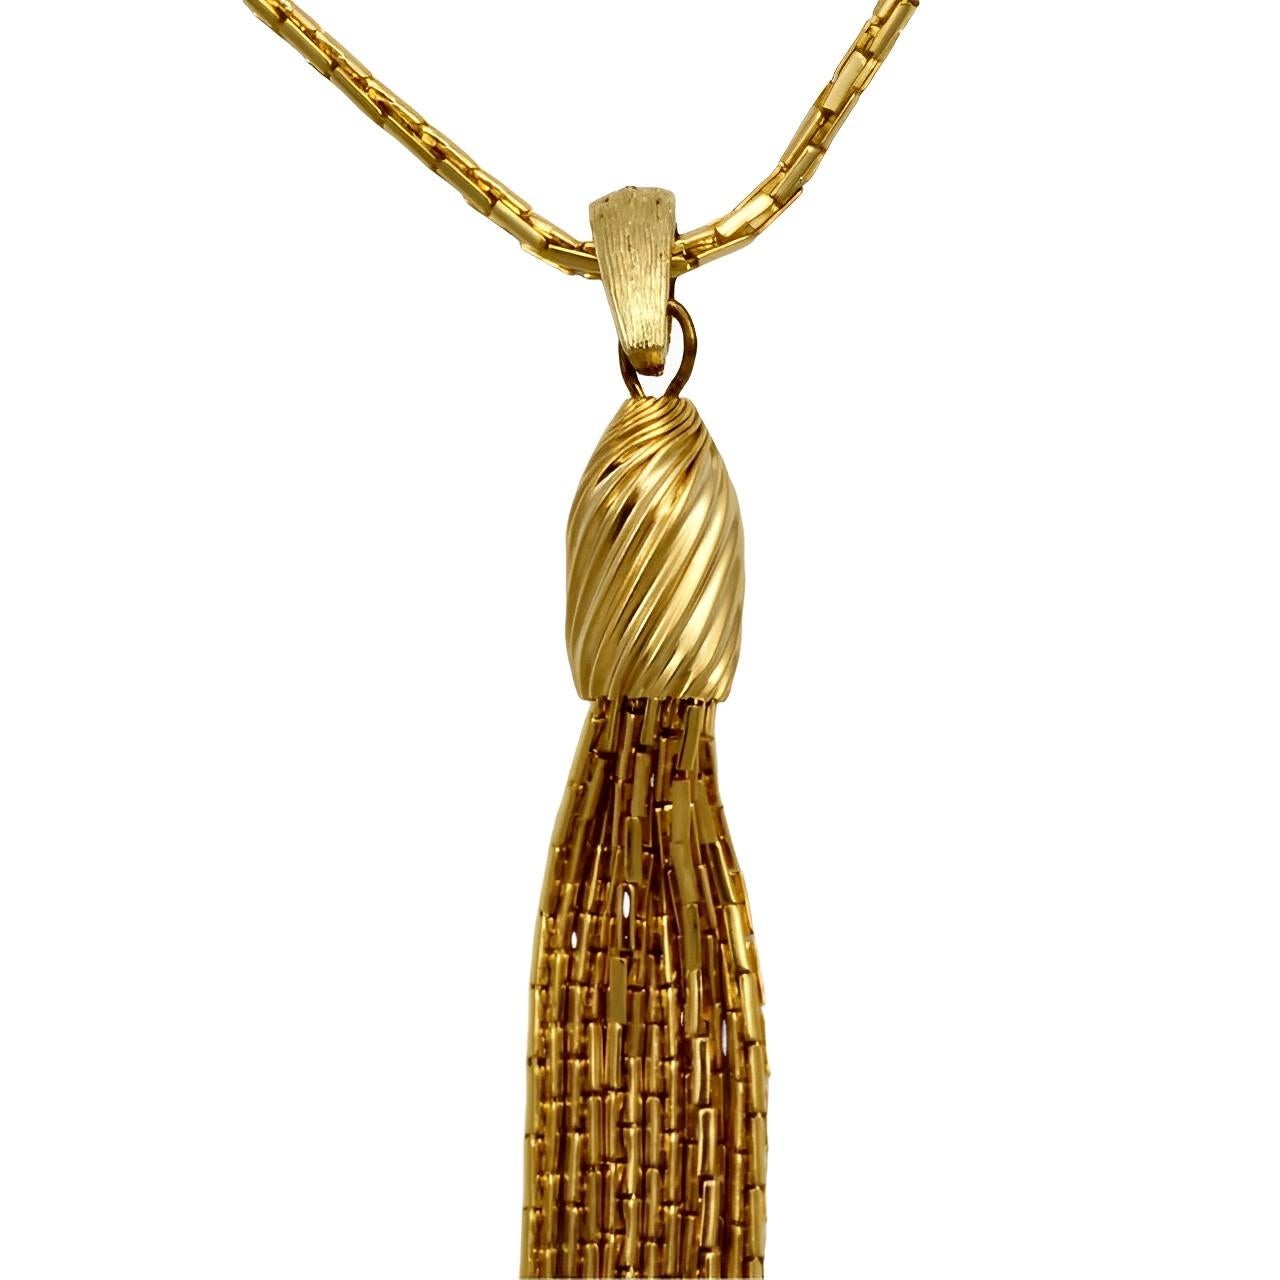 Gold plated elongated box chain necklace, featuring a lovely six strand tassel. Measuring length 55.5 cm / 21.8 inches, with an extension of 6.5 cm / 2.5 inches. The tassel pendant is length 10.5 cm / 4.1 inches. The necklace is in very good